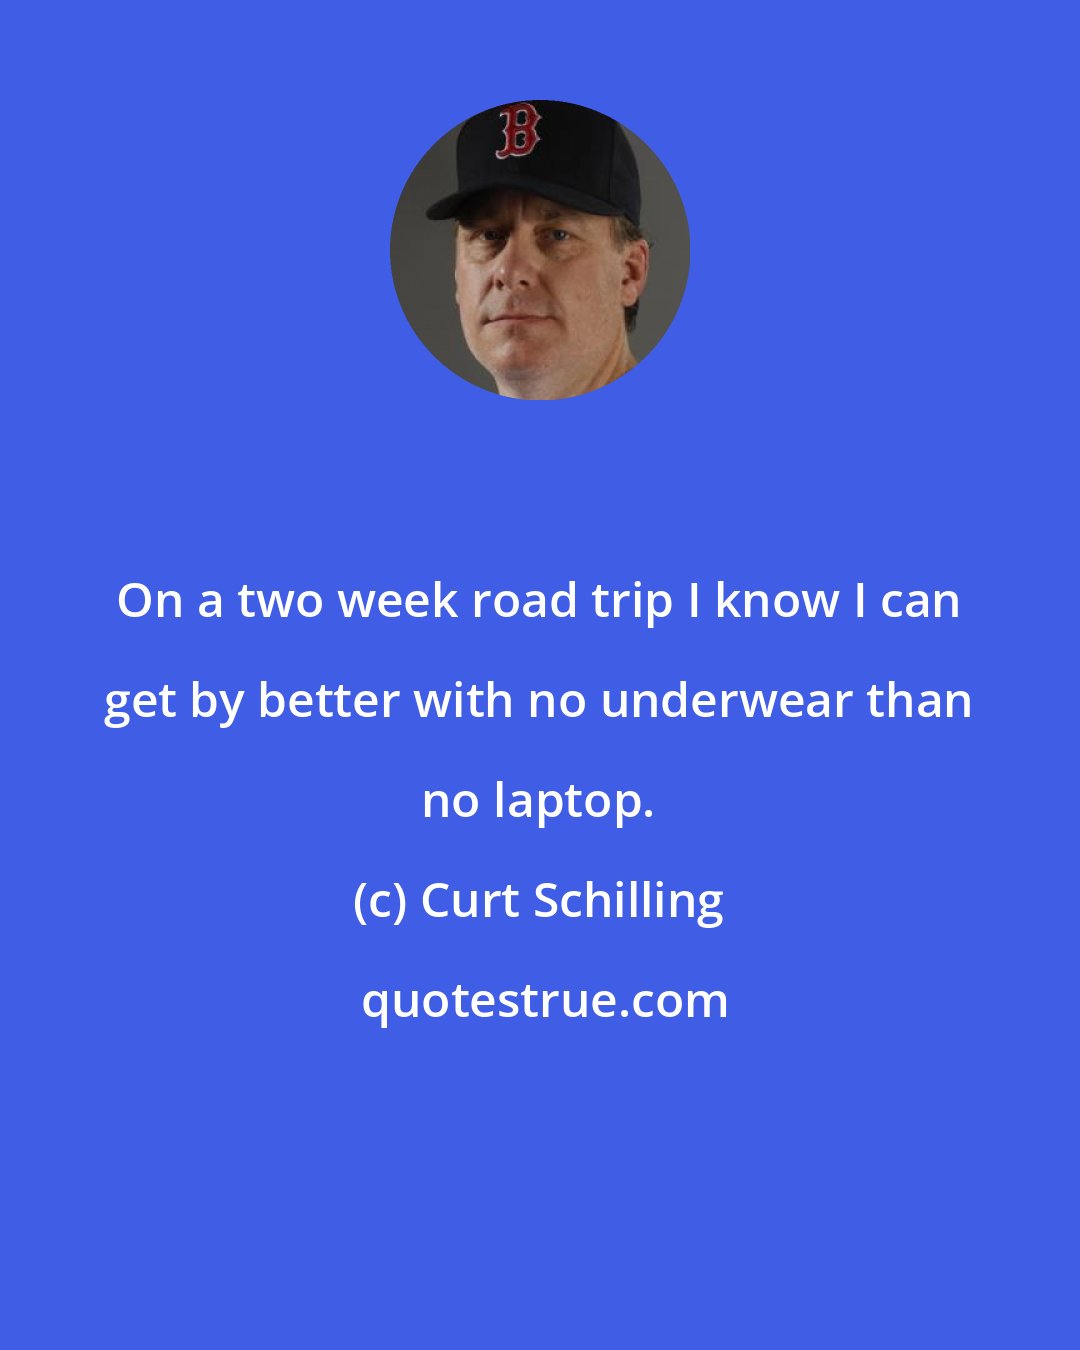 Curt Schilling: On a two week road trip I know I can get by better with no underwear than no laptop.